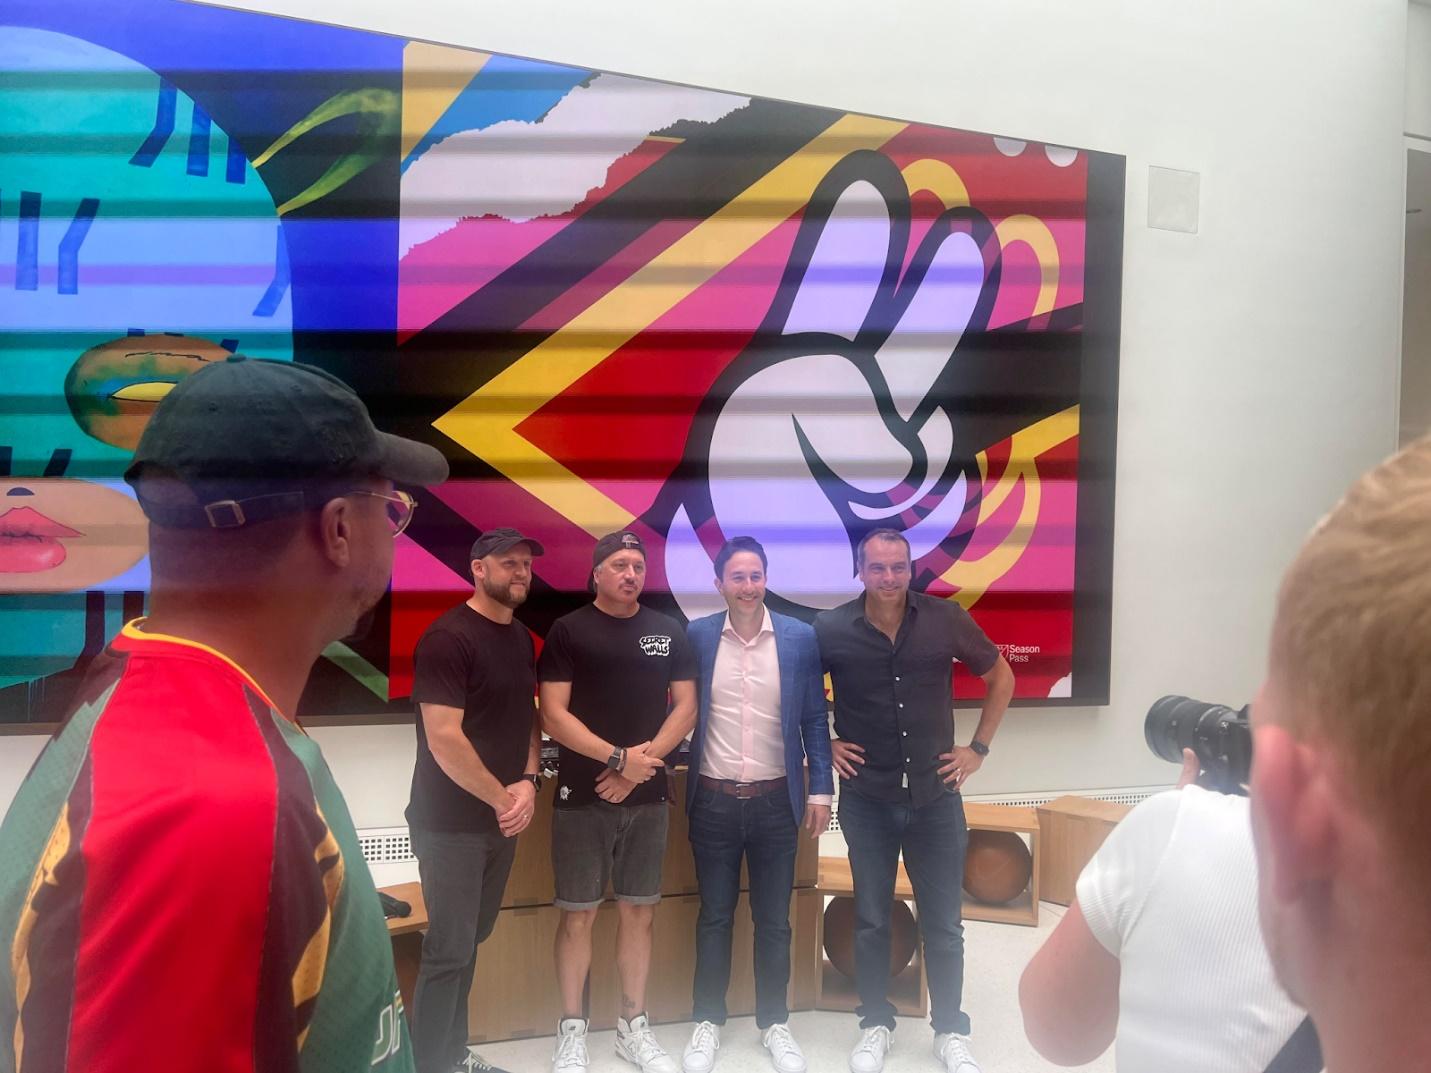 A group of men standing in front of a colorful wall

Description automatically generated